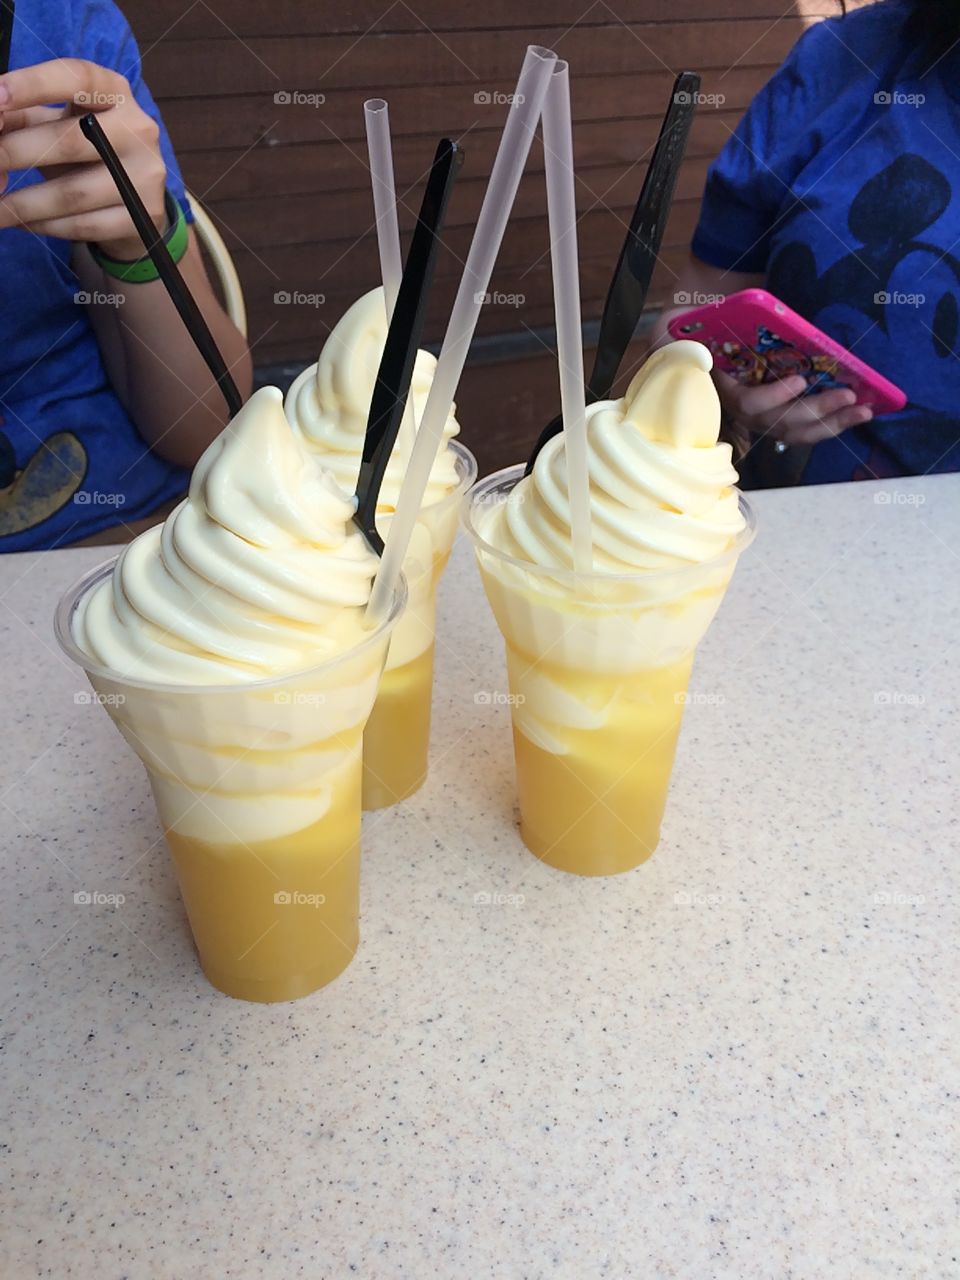 Dole whips